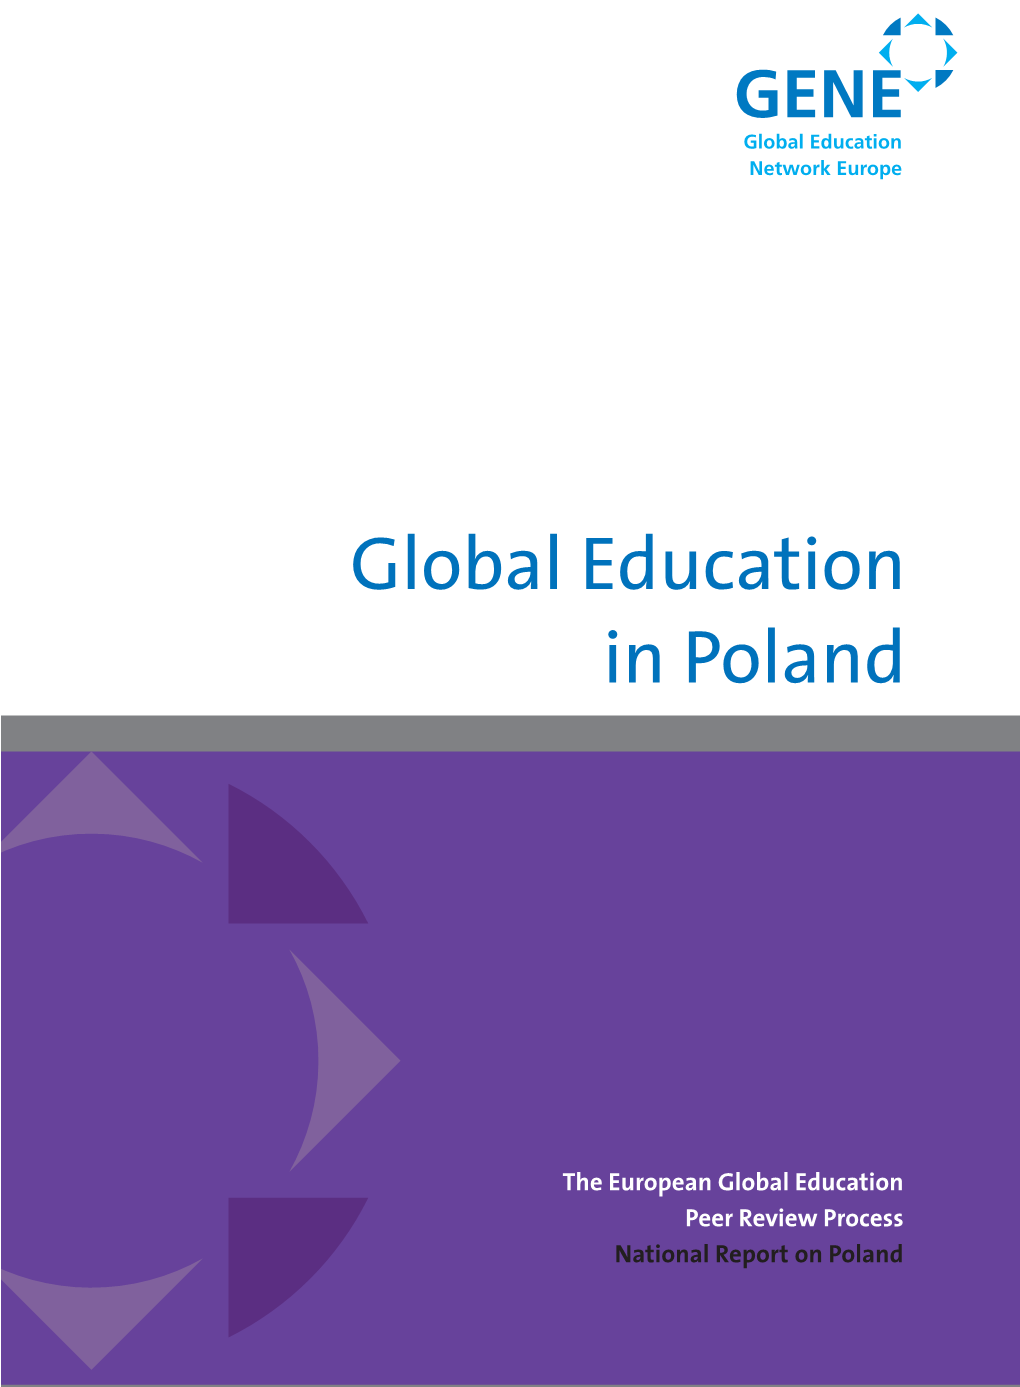 Global Education in Poland